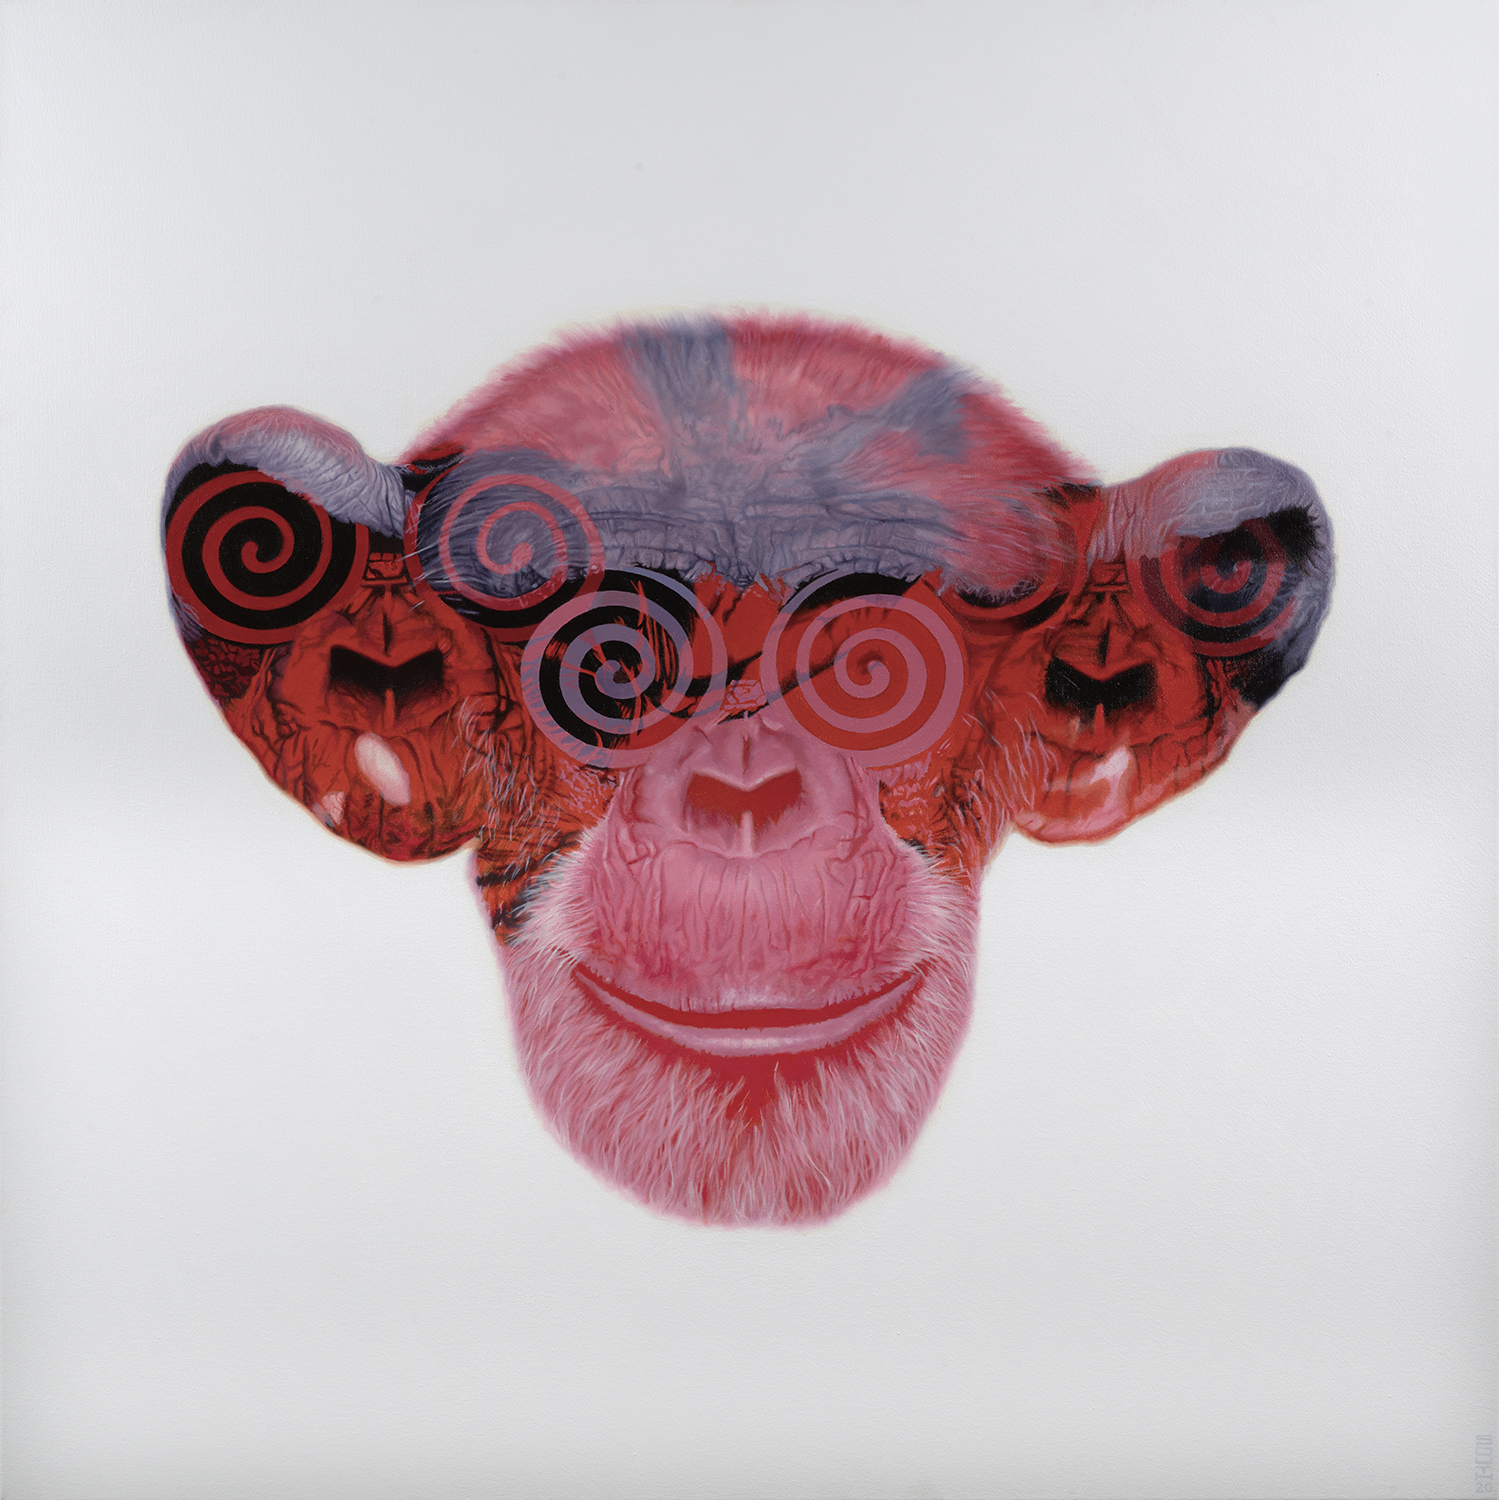 The head of a money in red with other monkey heads captured inside his head - Tony South - Hypno